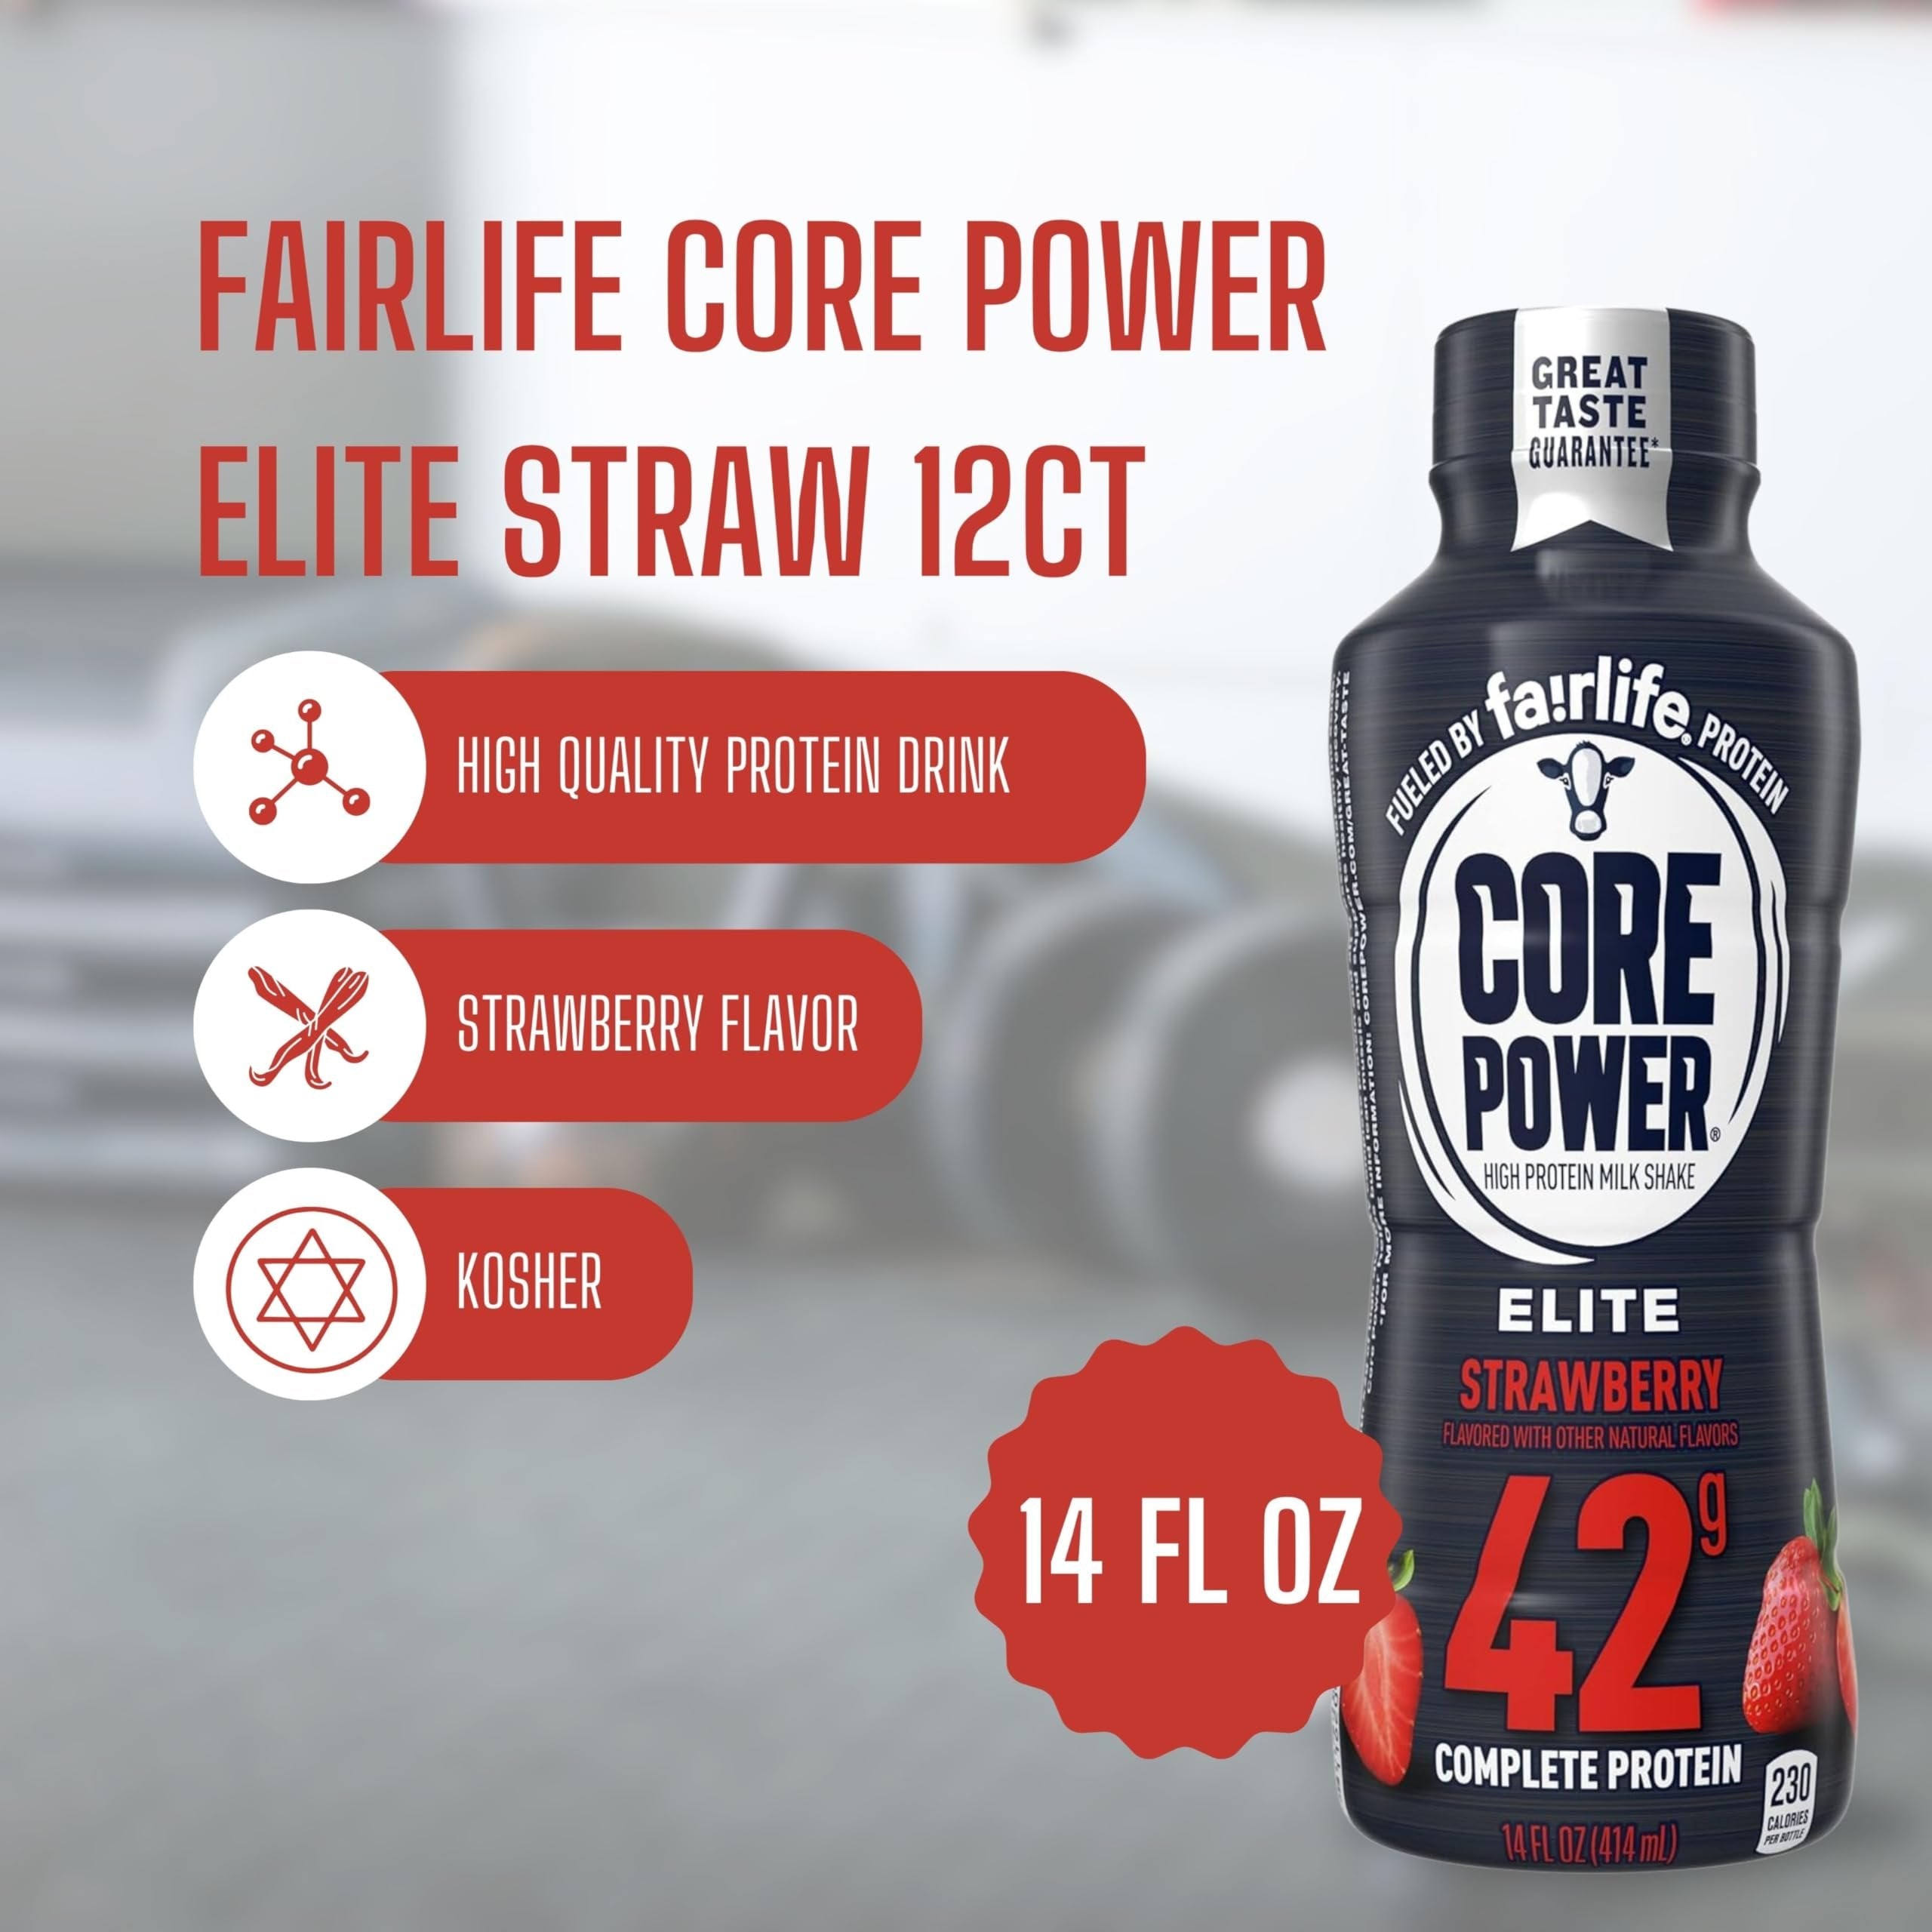 Core Power Fairlife Elite 42g High Protein Milk Shake - Kosher, Strawberry Protein Shake for Workout Recovery - 14 Fl Oz (Pack of 12) & Multi-Purpose Key Chain